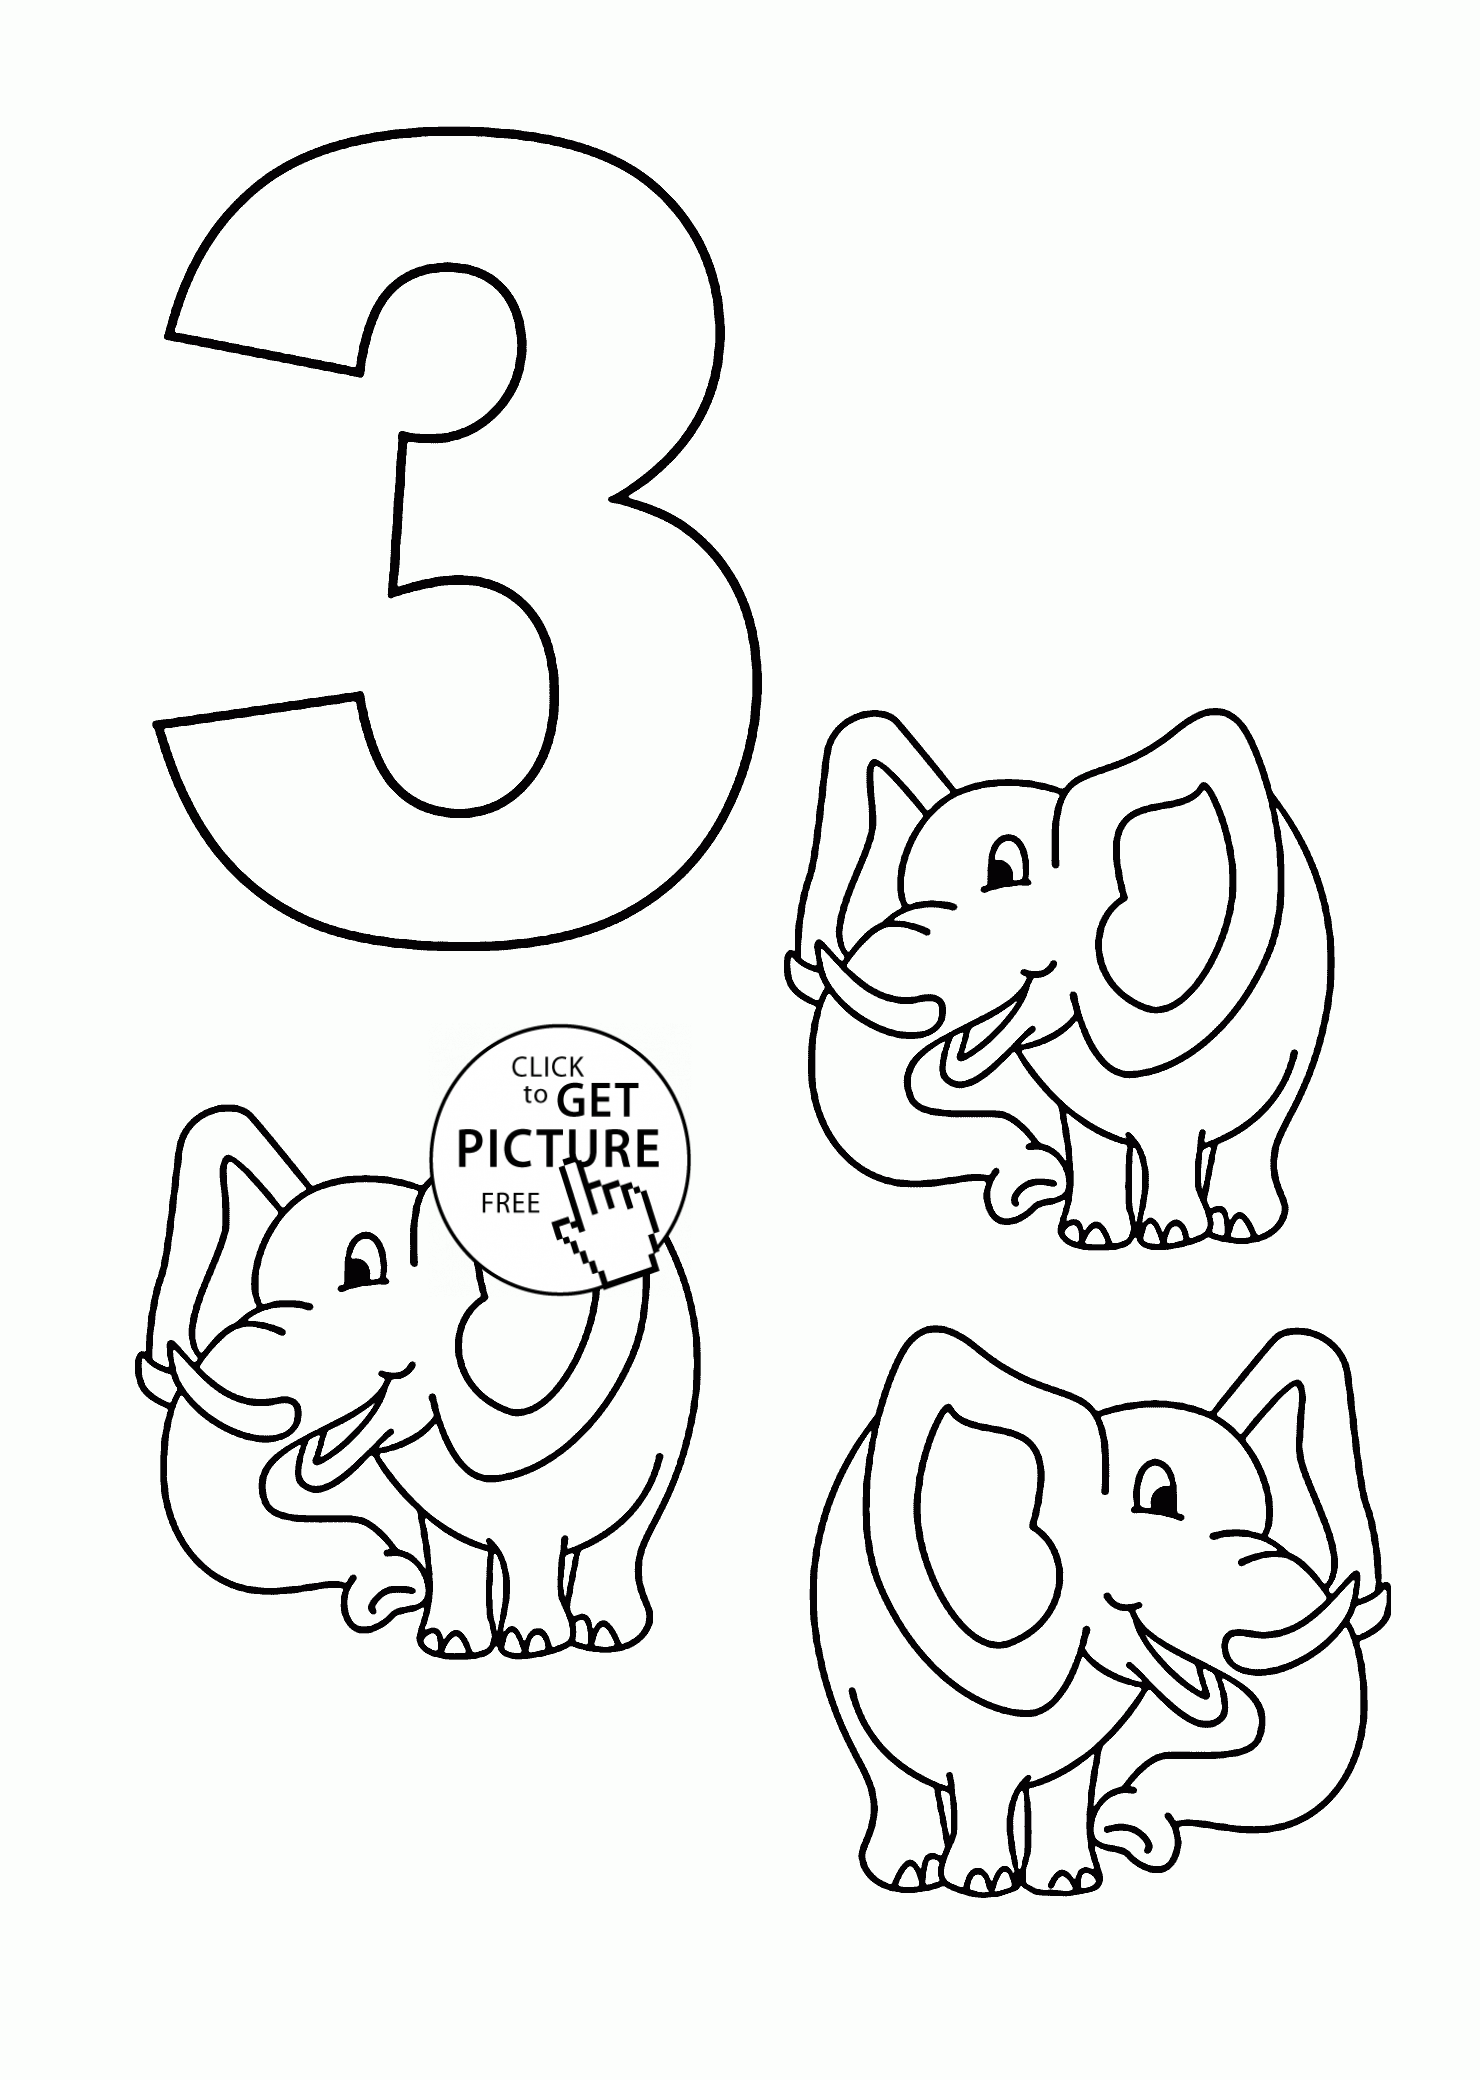 Free Number 3 Coloring Page, Download Free Number 3 Coloring Page png ...